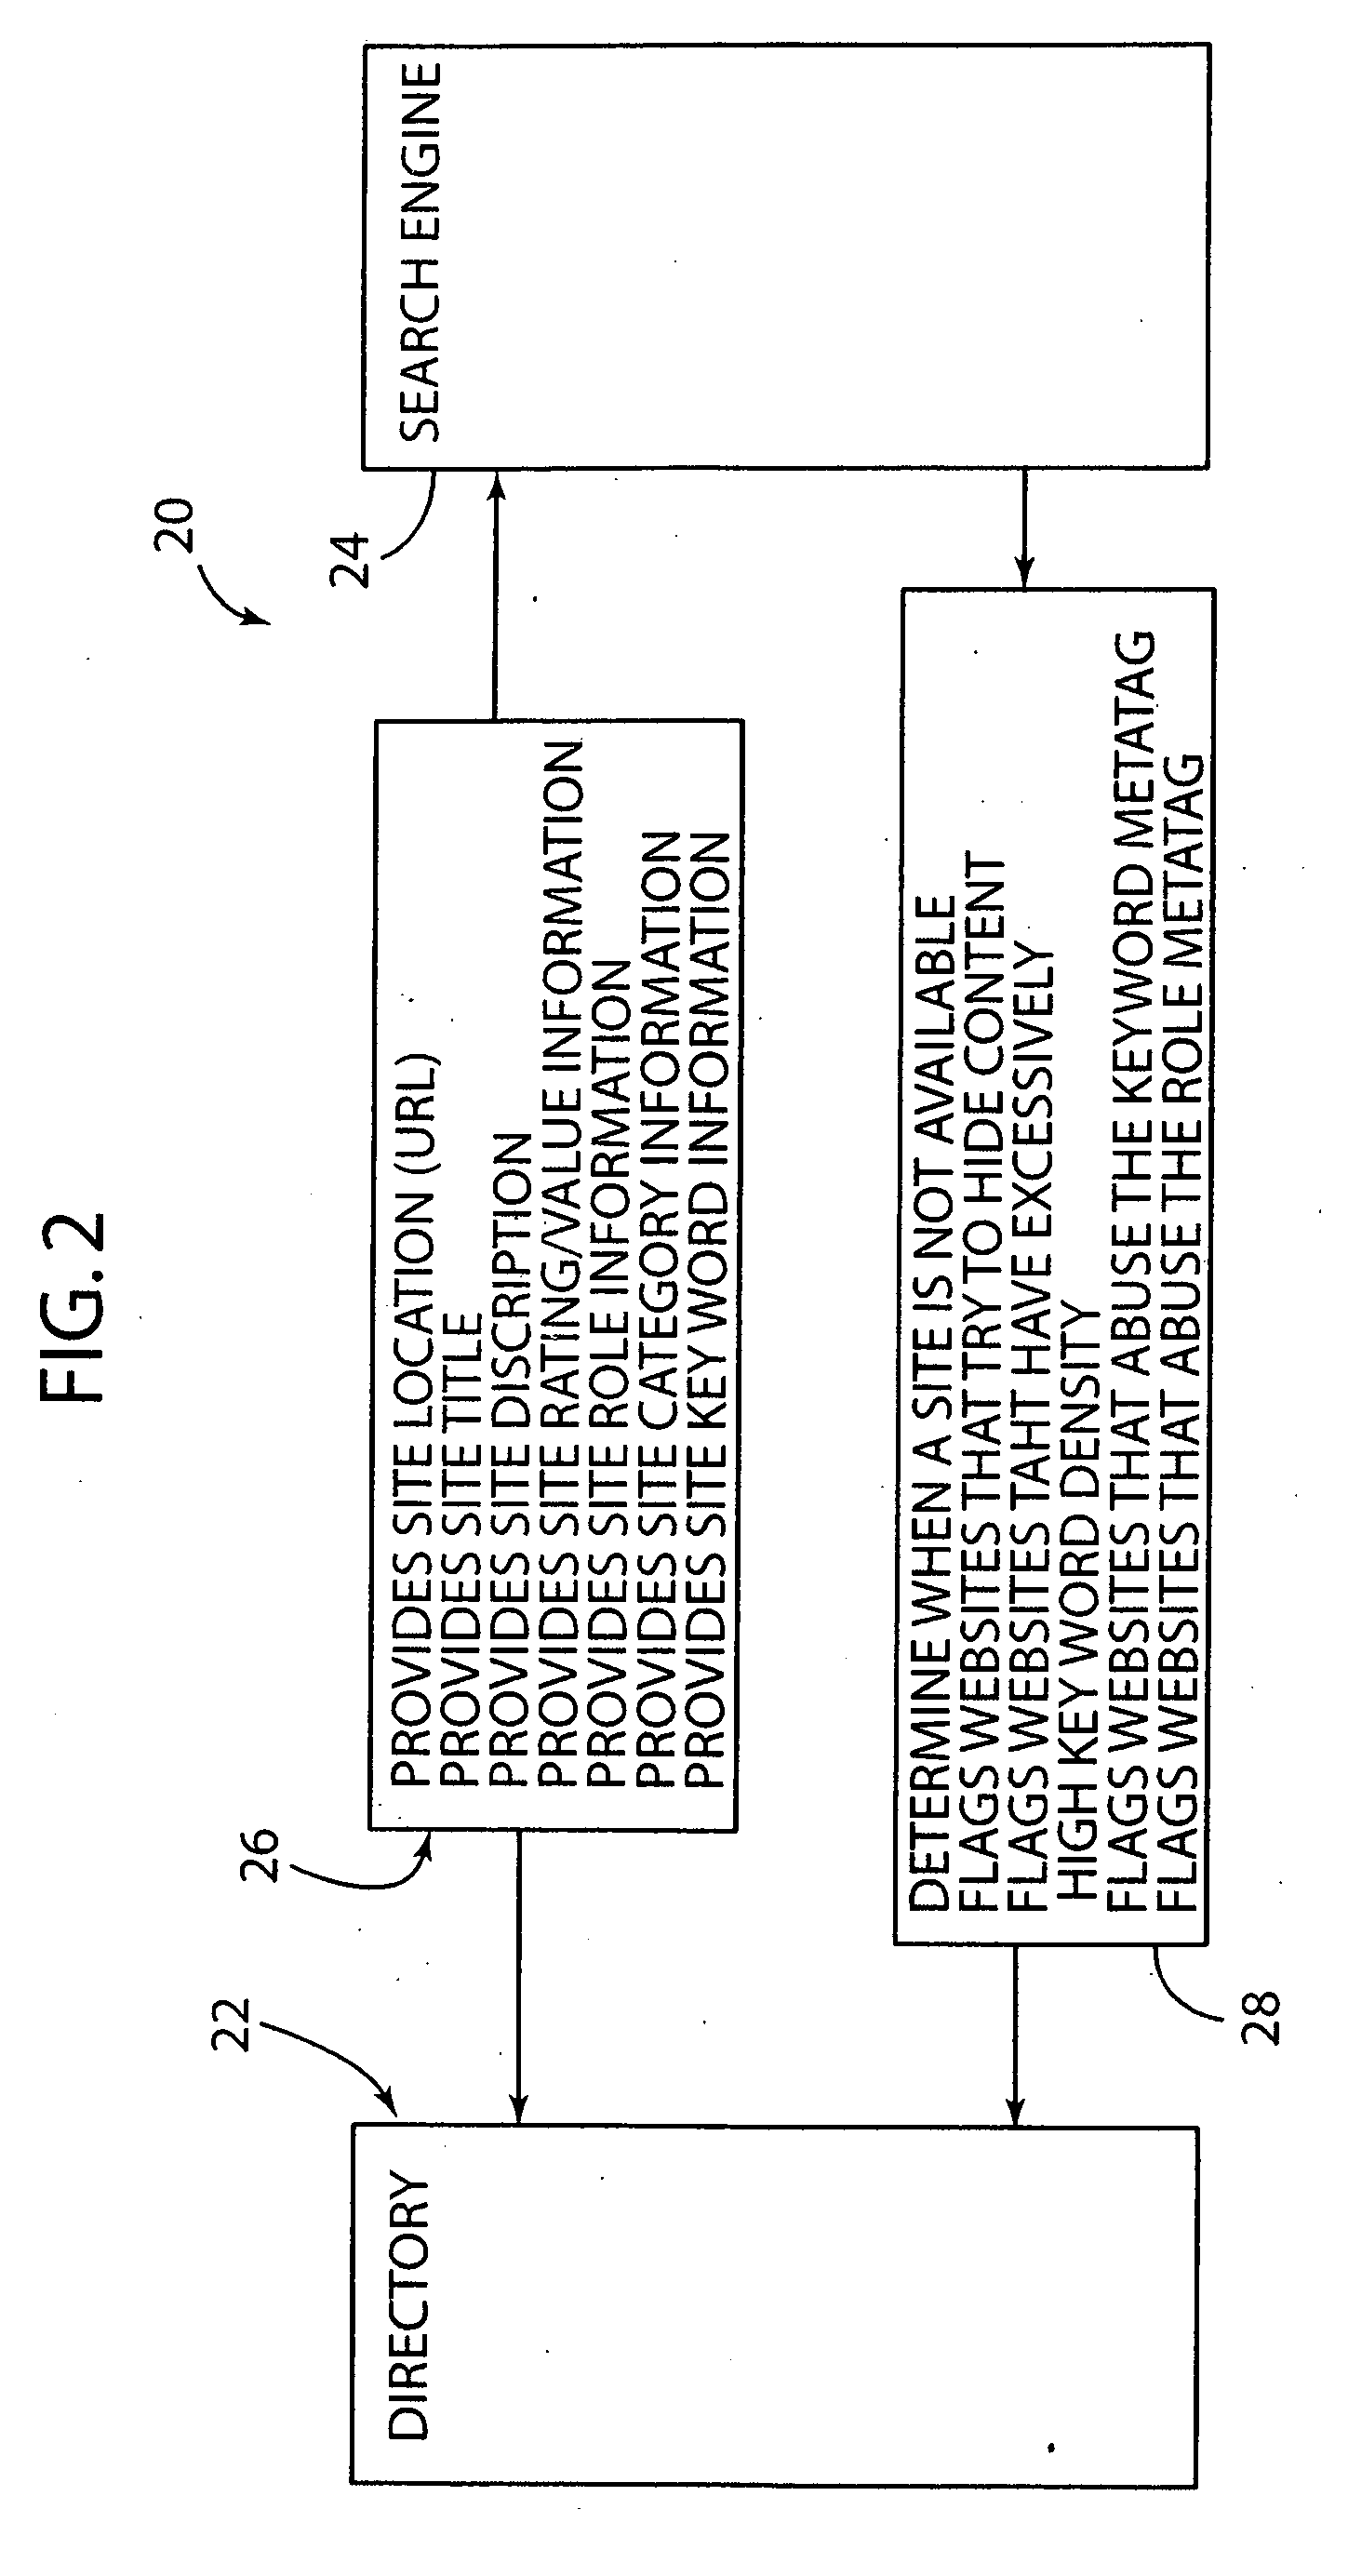 Method and system for performing multi-dimensional searches